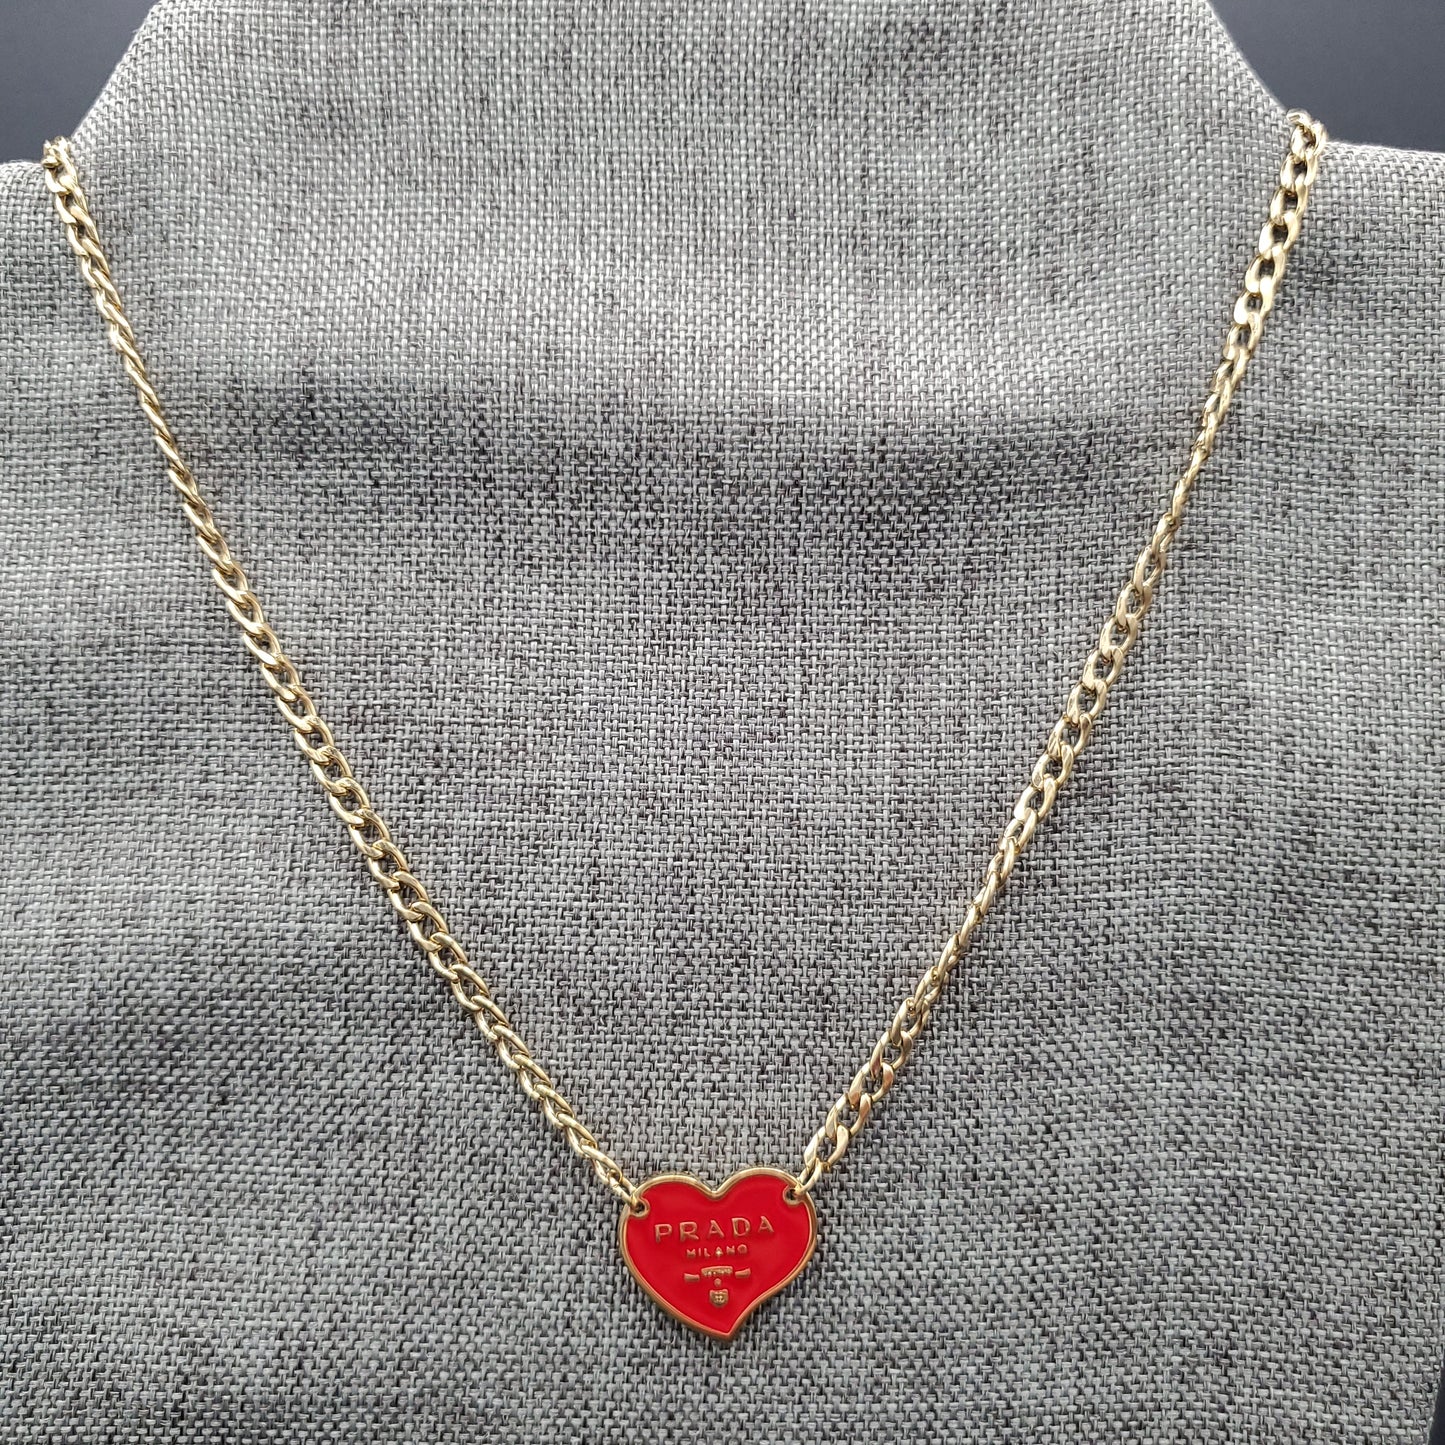 P*rada Red Heart Necklace